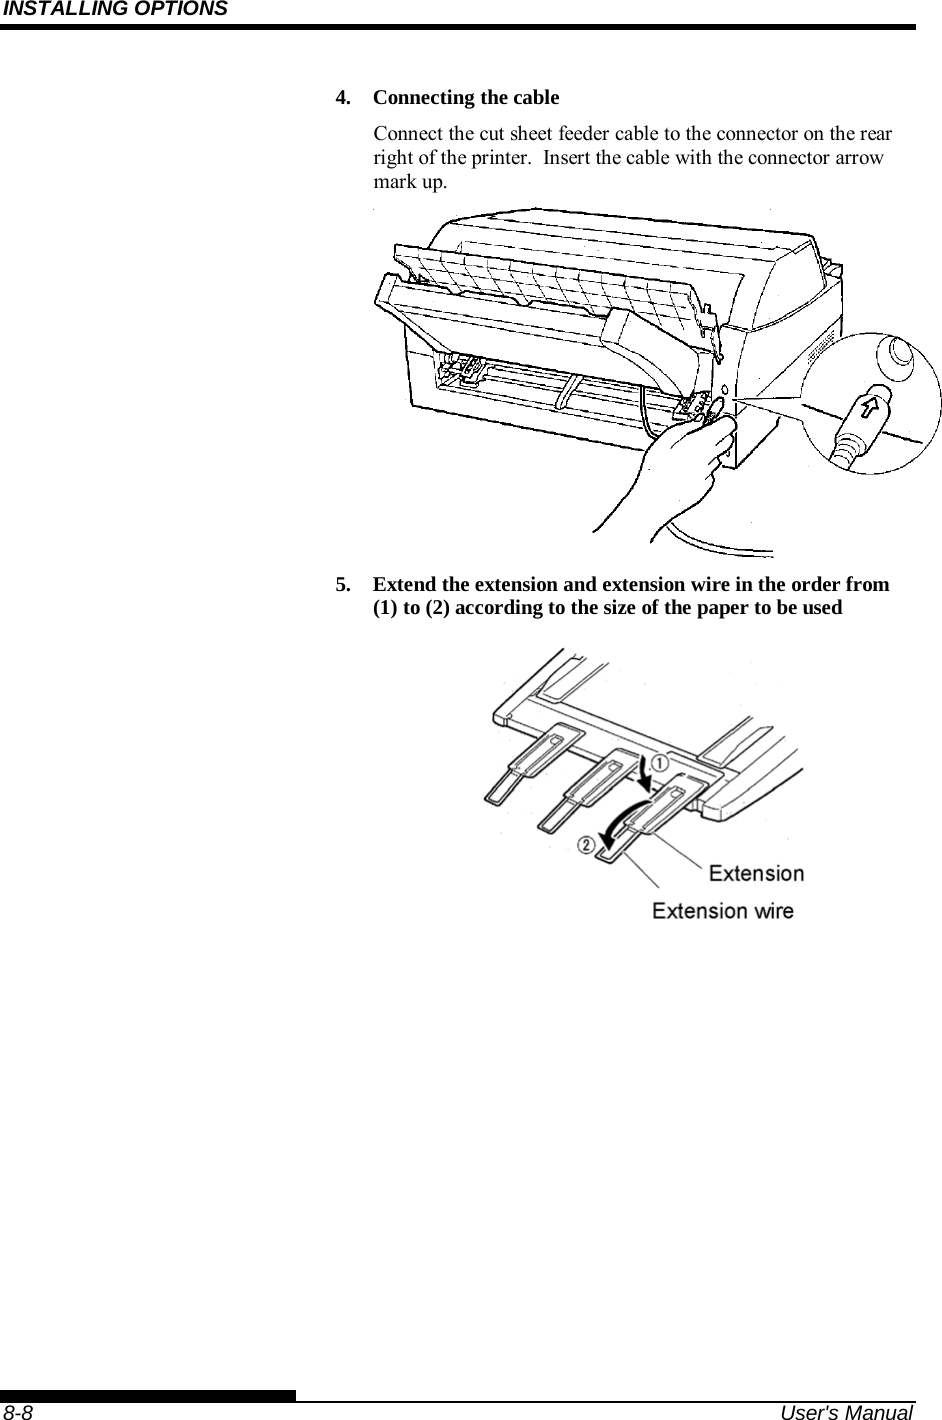 INSTALLING OPTIONS    8-8  User&apos;s Manual 4.  Connecting the cable Connect the cut sheet feeder cable to the connector on the rear right of the printer.  Insert the cable with the connector arrow mark up.  5.  Extend the extension and extension wire in the order from (1) to (2) according to the size of the paper to be used  